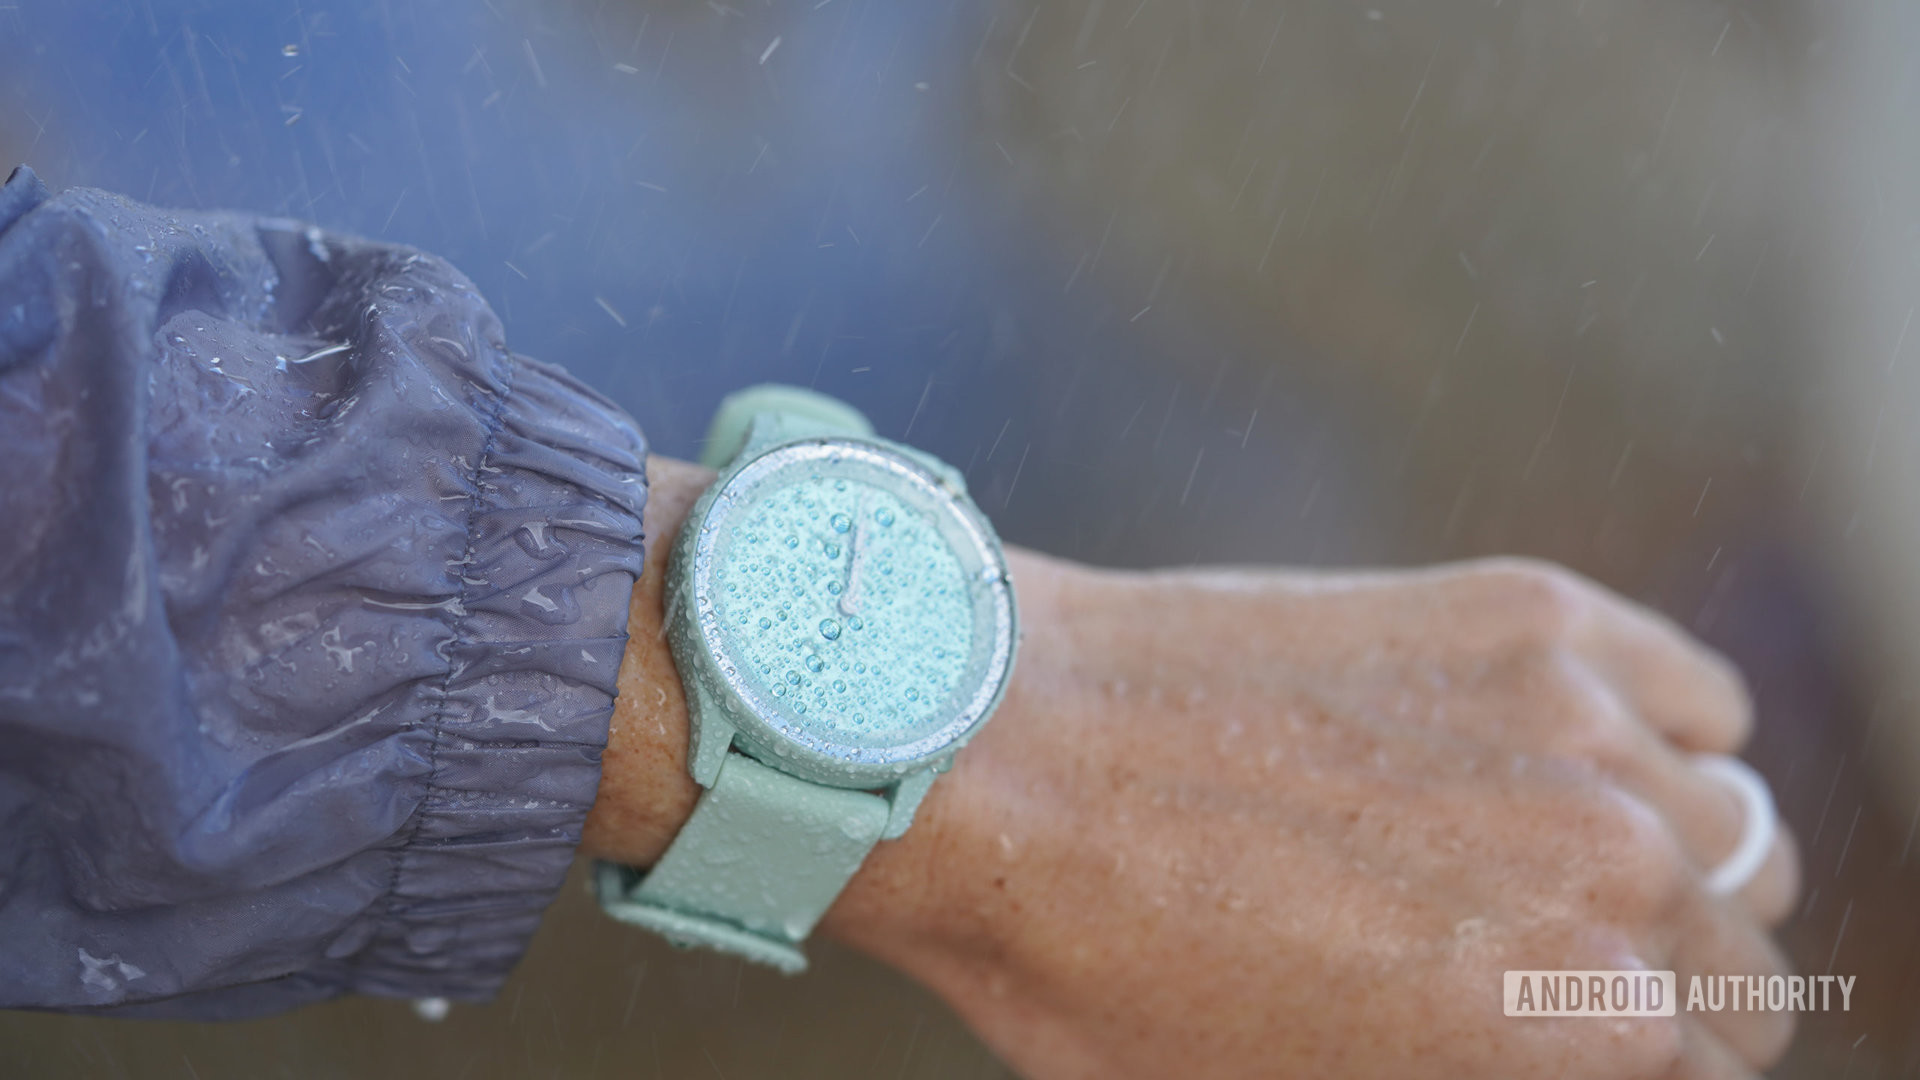 A reviewers tests a Garmin Vivomove Sport in the pouring rain.